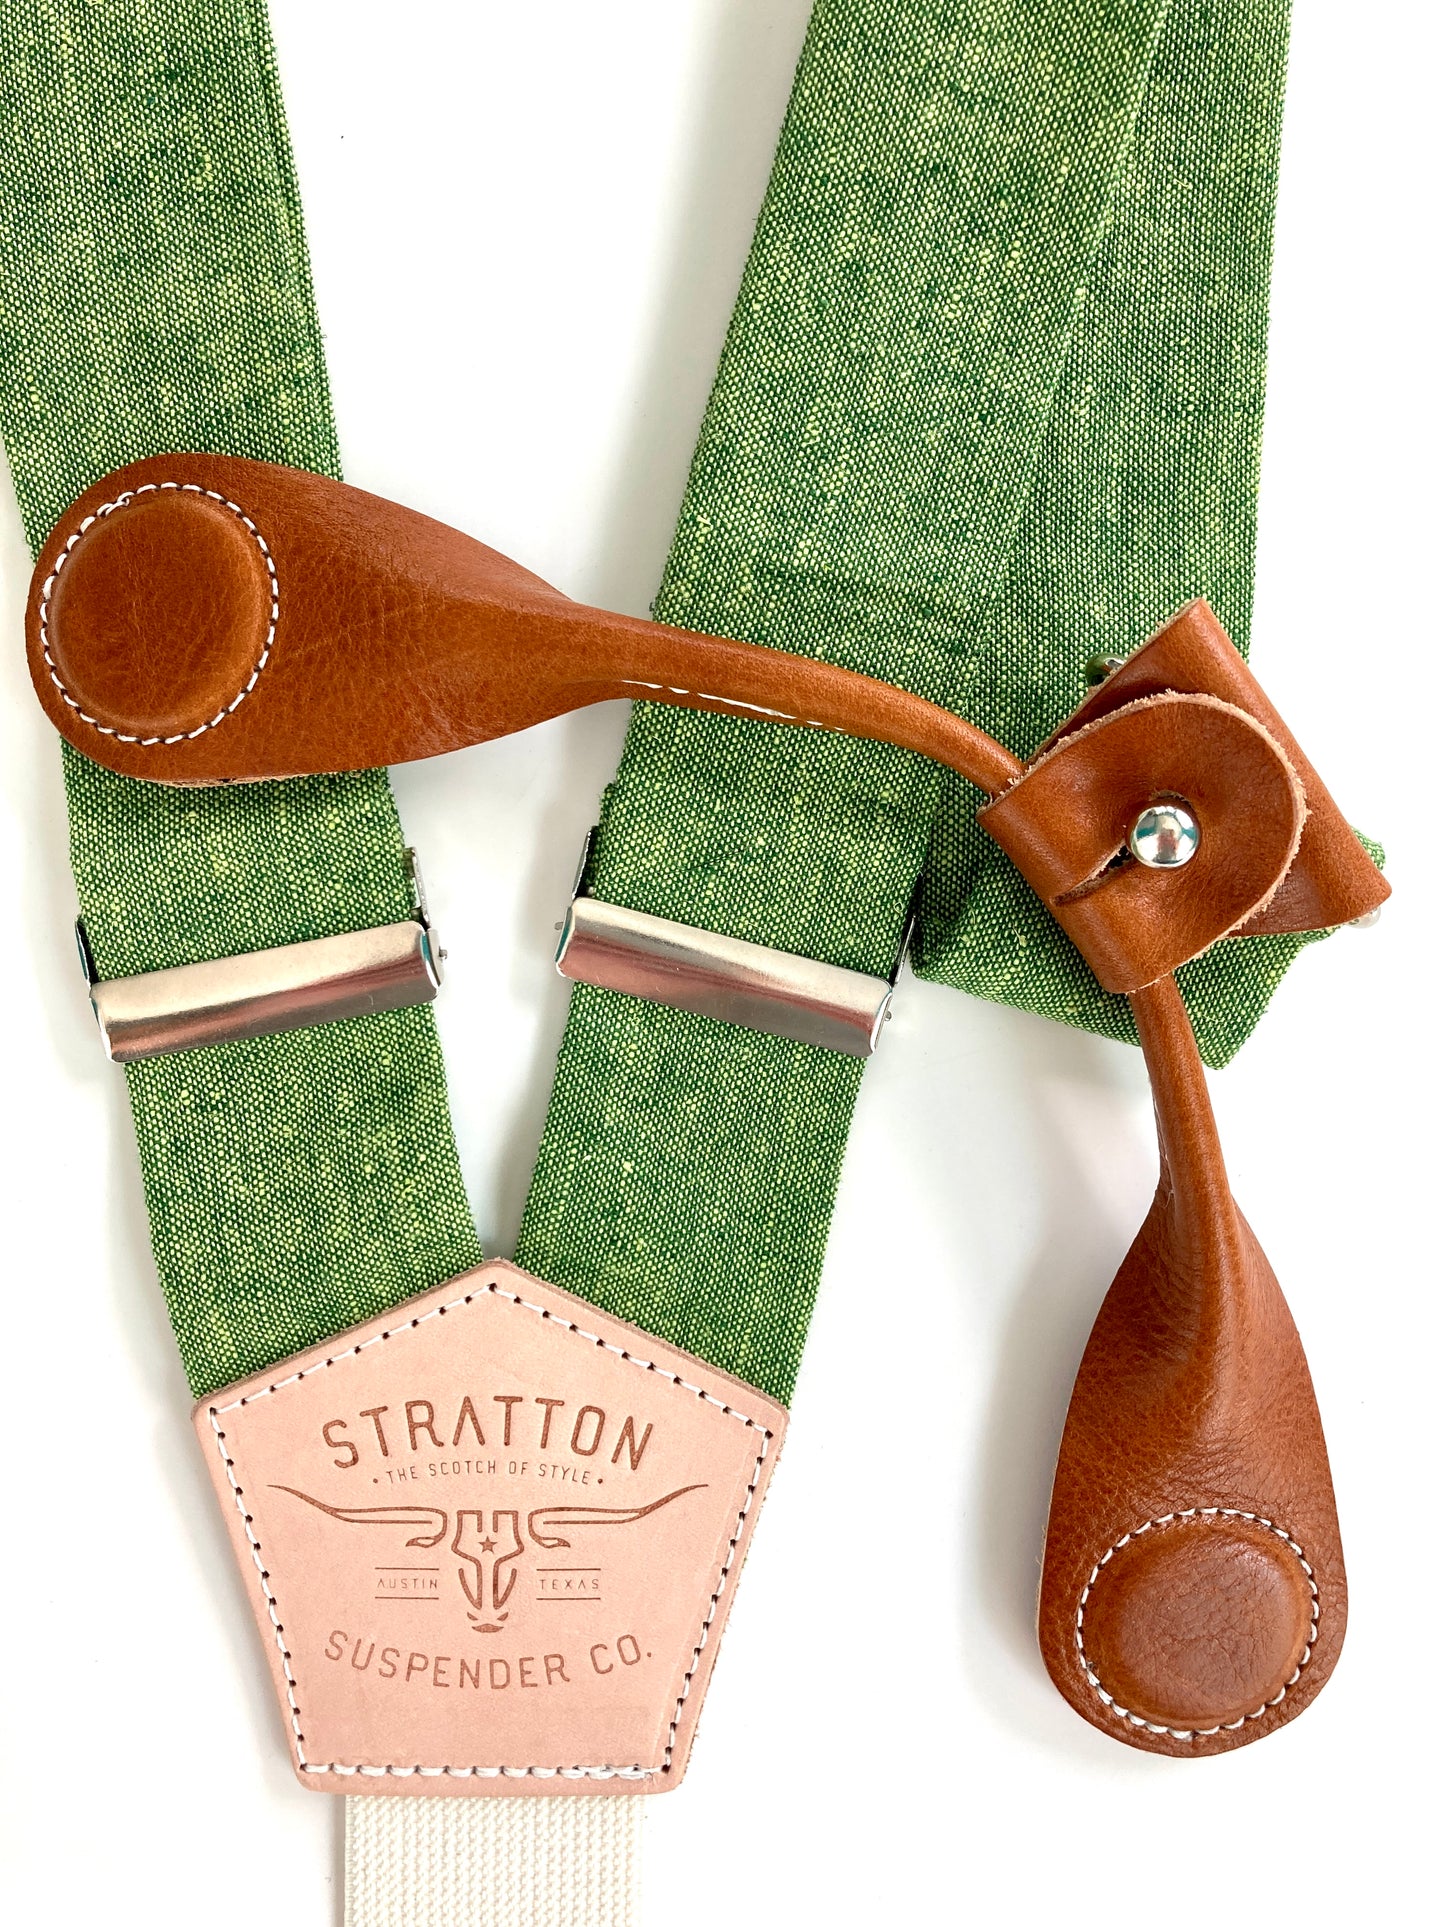 Stratton Suspender Co. features our Spruce (bright green) linen suspenders on veg tan shoulder leather with cream colored elastic back strap for the Fall 2022 suspenders collection Magnetic Stratton Suspender clasps in Tan Pontedero Italian leather hand-picked by Stratton Suspender Co.